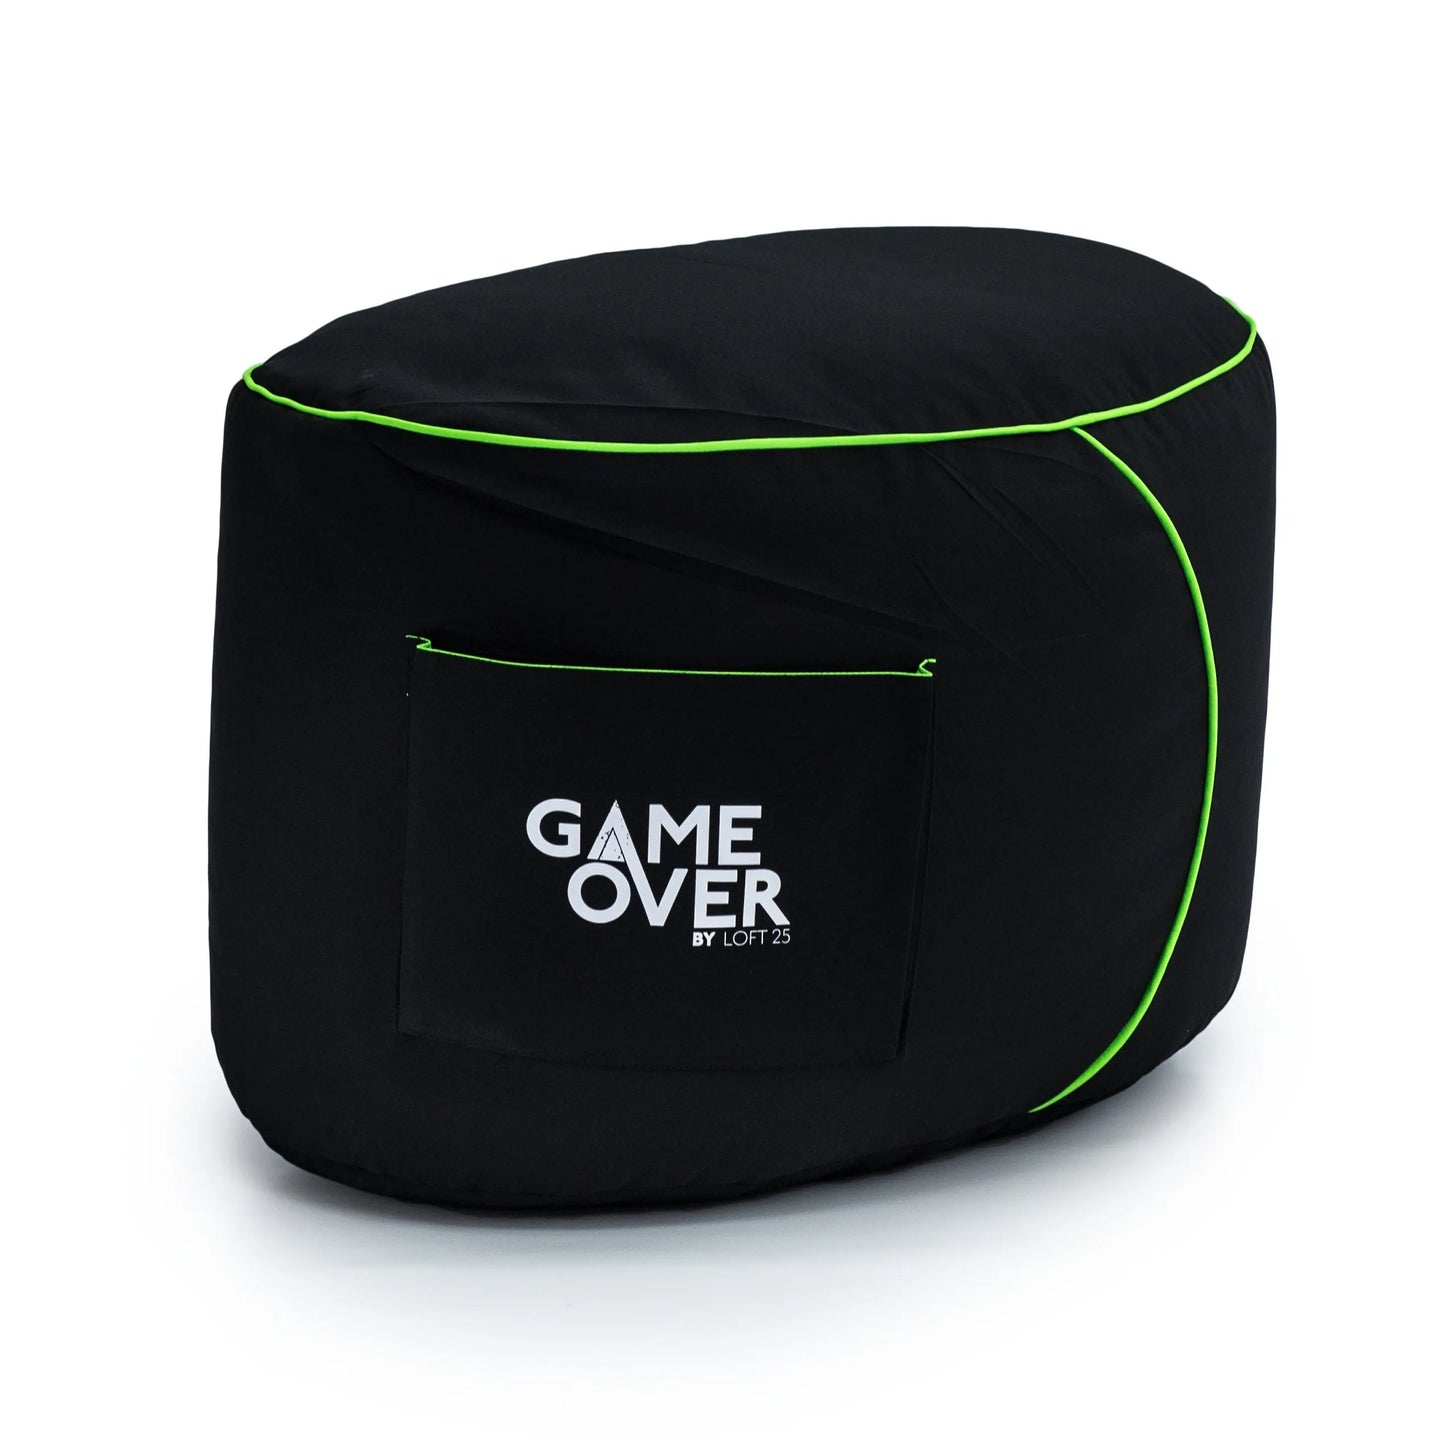 Black bean bag ottoman with red trim and "GAME OVER" logo.